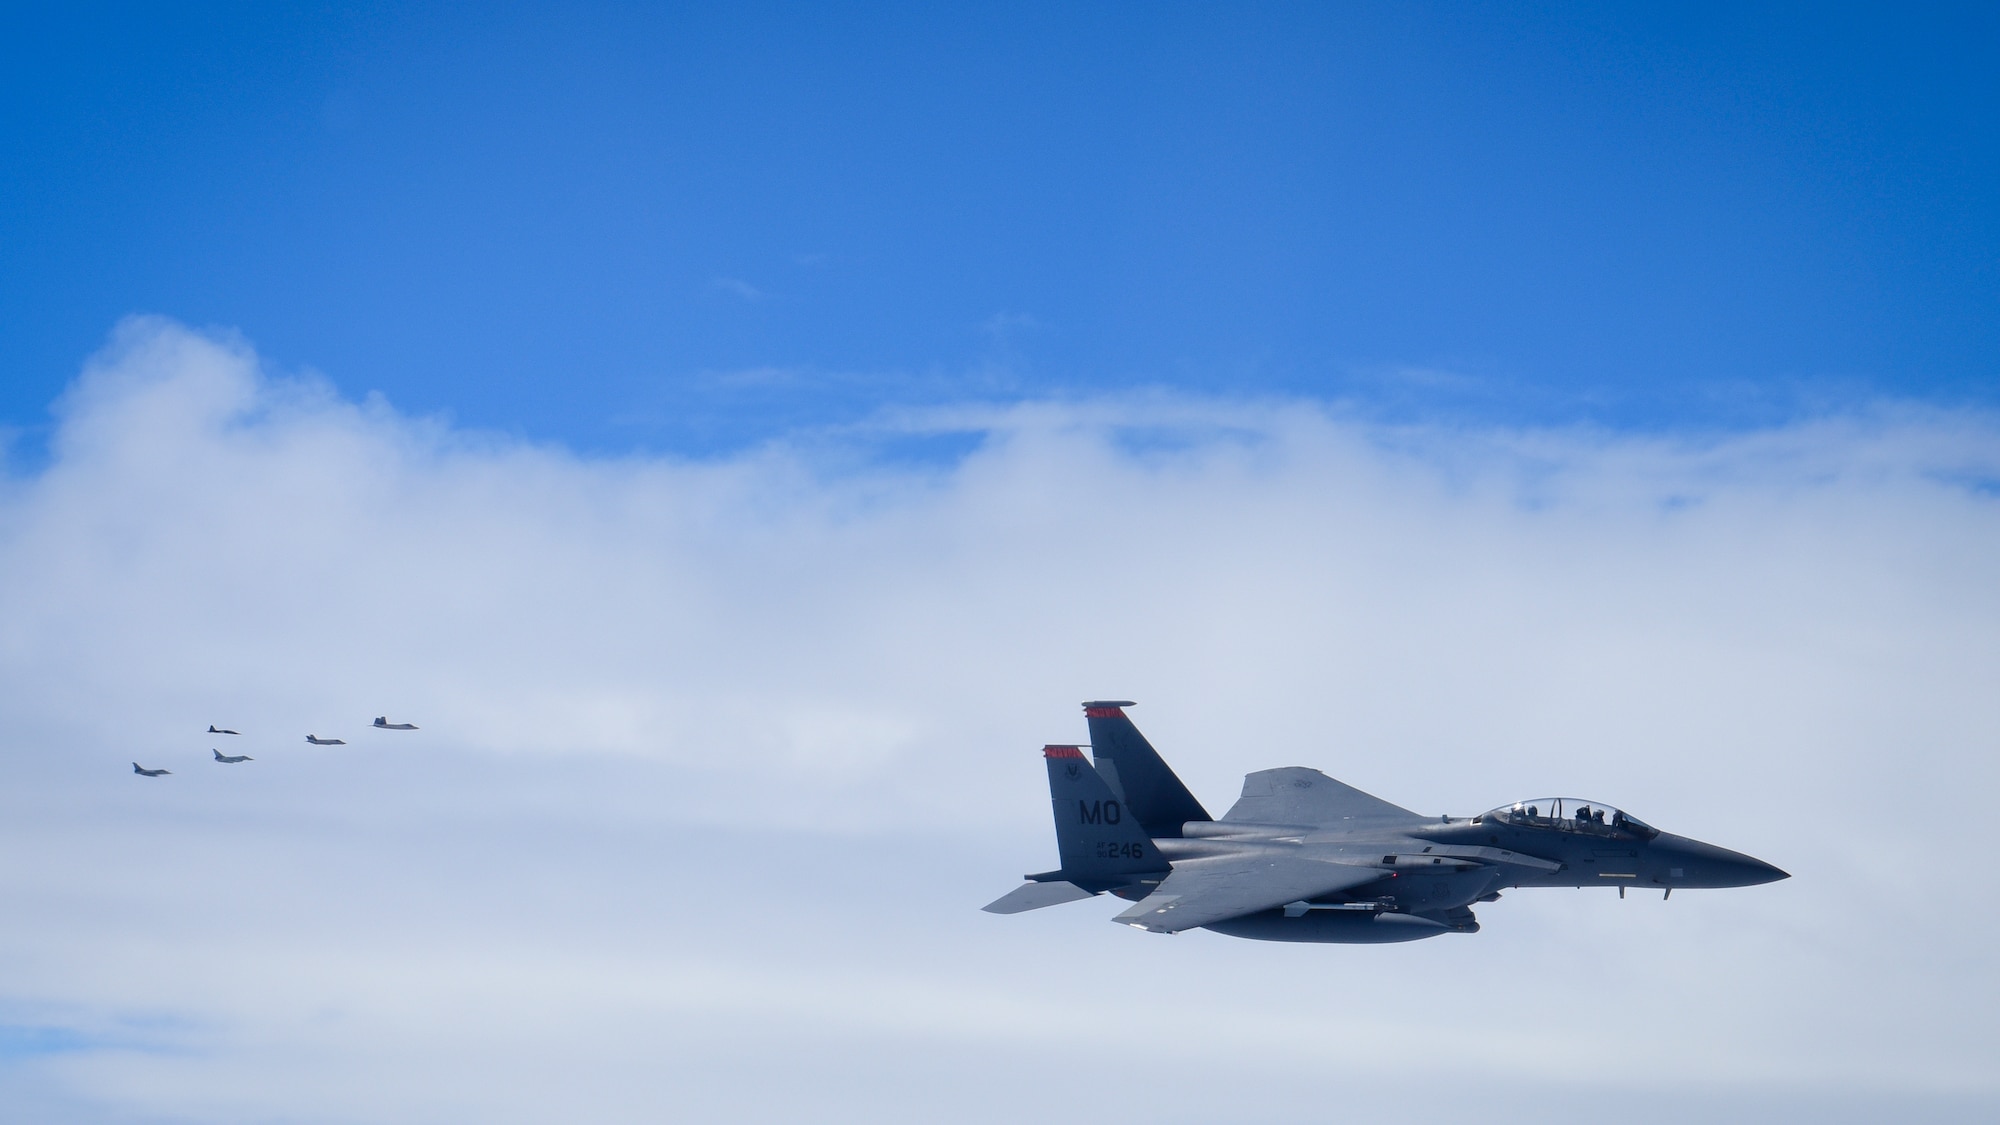 An F-15E Strike Eagle breaks-off from a formation flight during ATLANTIC TRIDENT 17 near Joint Base Langley-Eustis, Va., April 26, 2017. The F-15Es, assigned to Mountain Home Air Force Base, Idaho, teamed with local T-38 Talons as adversary aircraft during the exercise. (U.S. Air Force photo/Staff Sgt. Natasha Stannard)